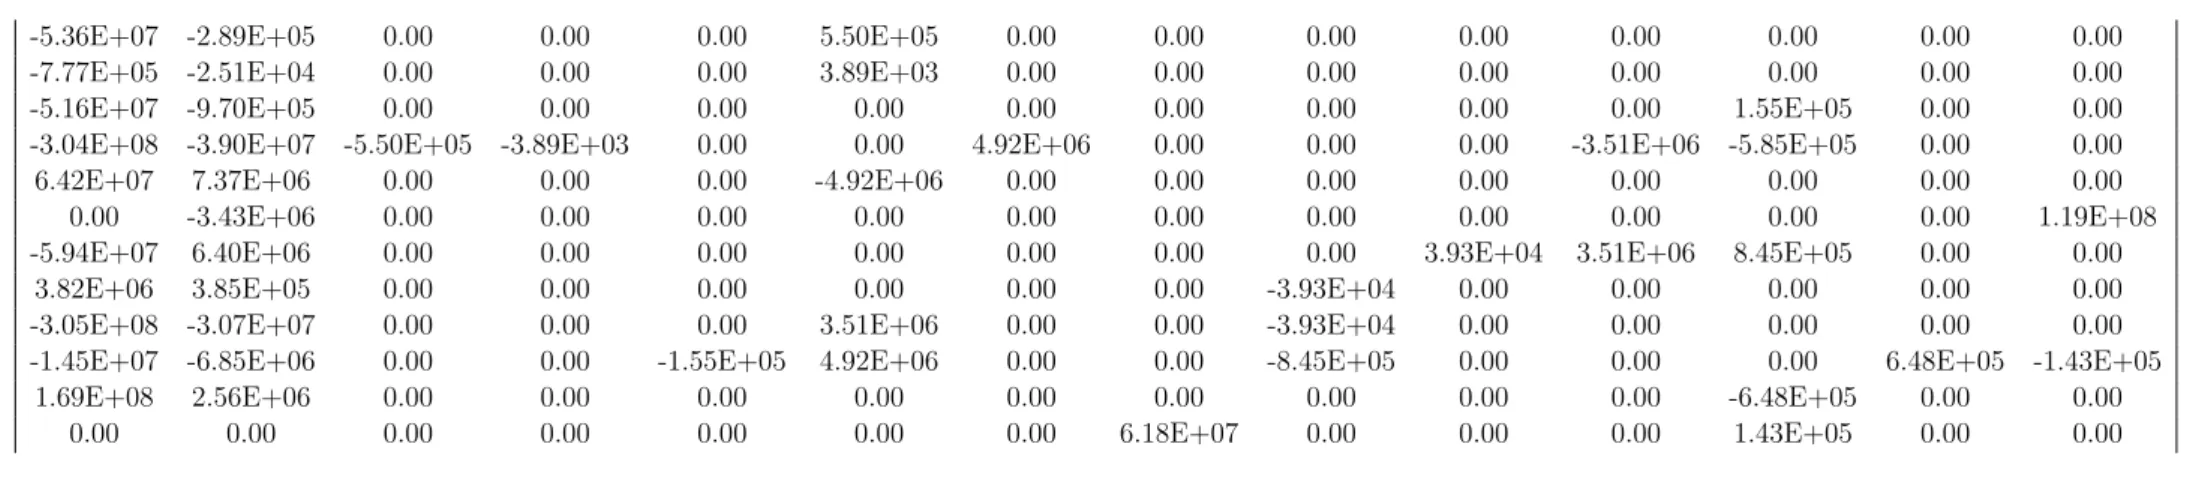 Table 6.11: Reduced attributed graph produced by implementing Technique 1 in Excel.